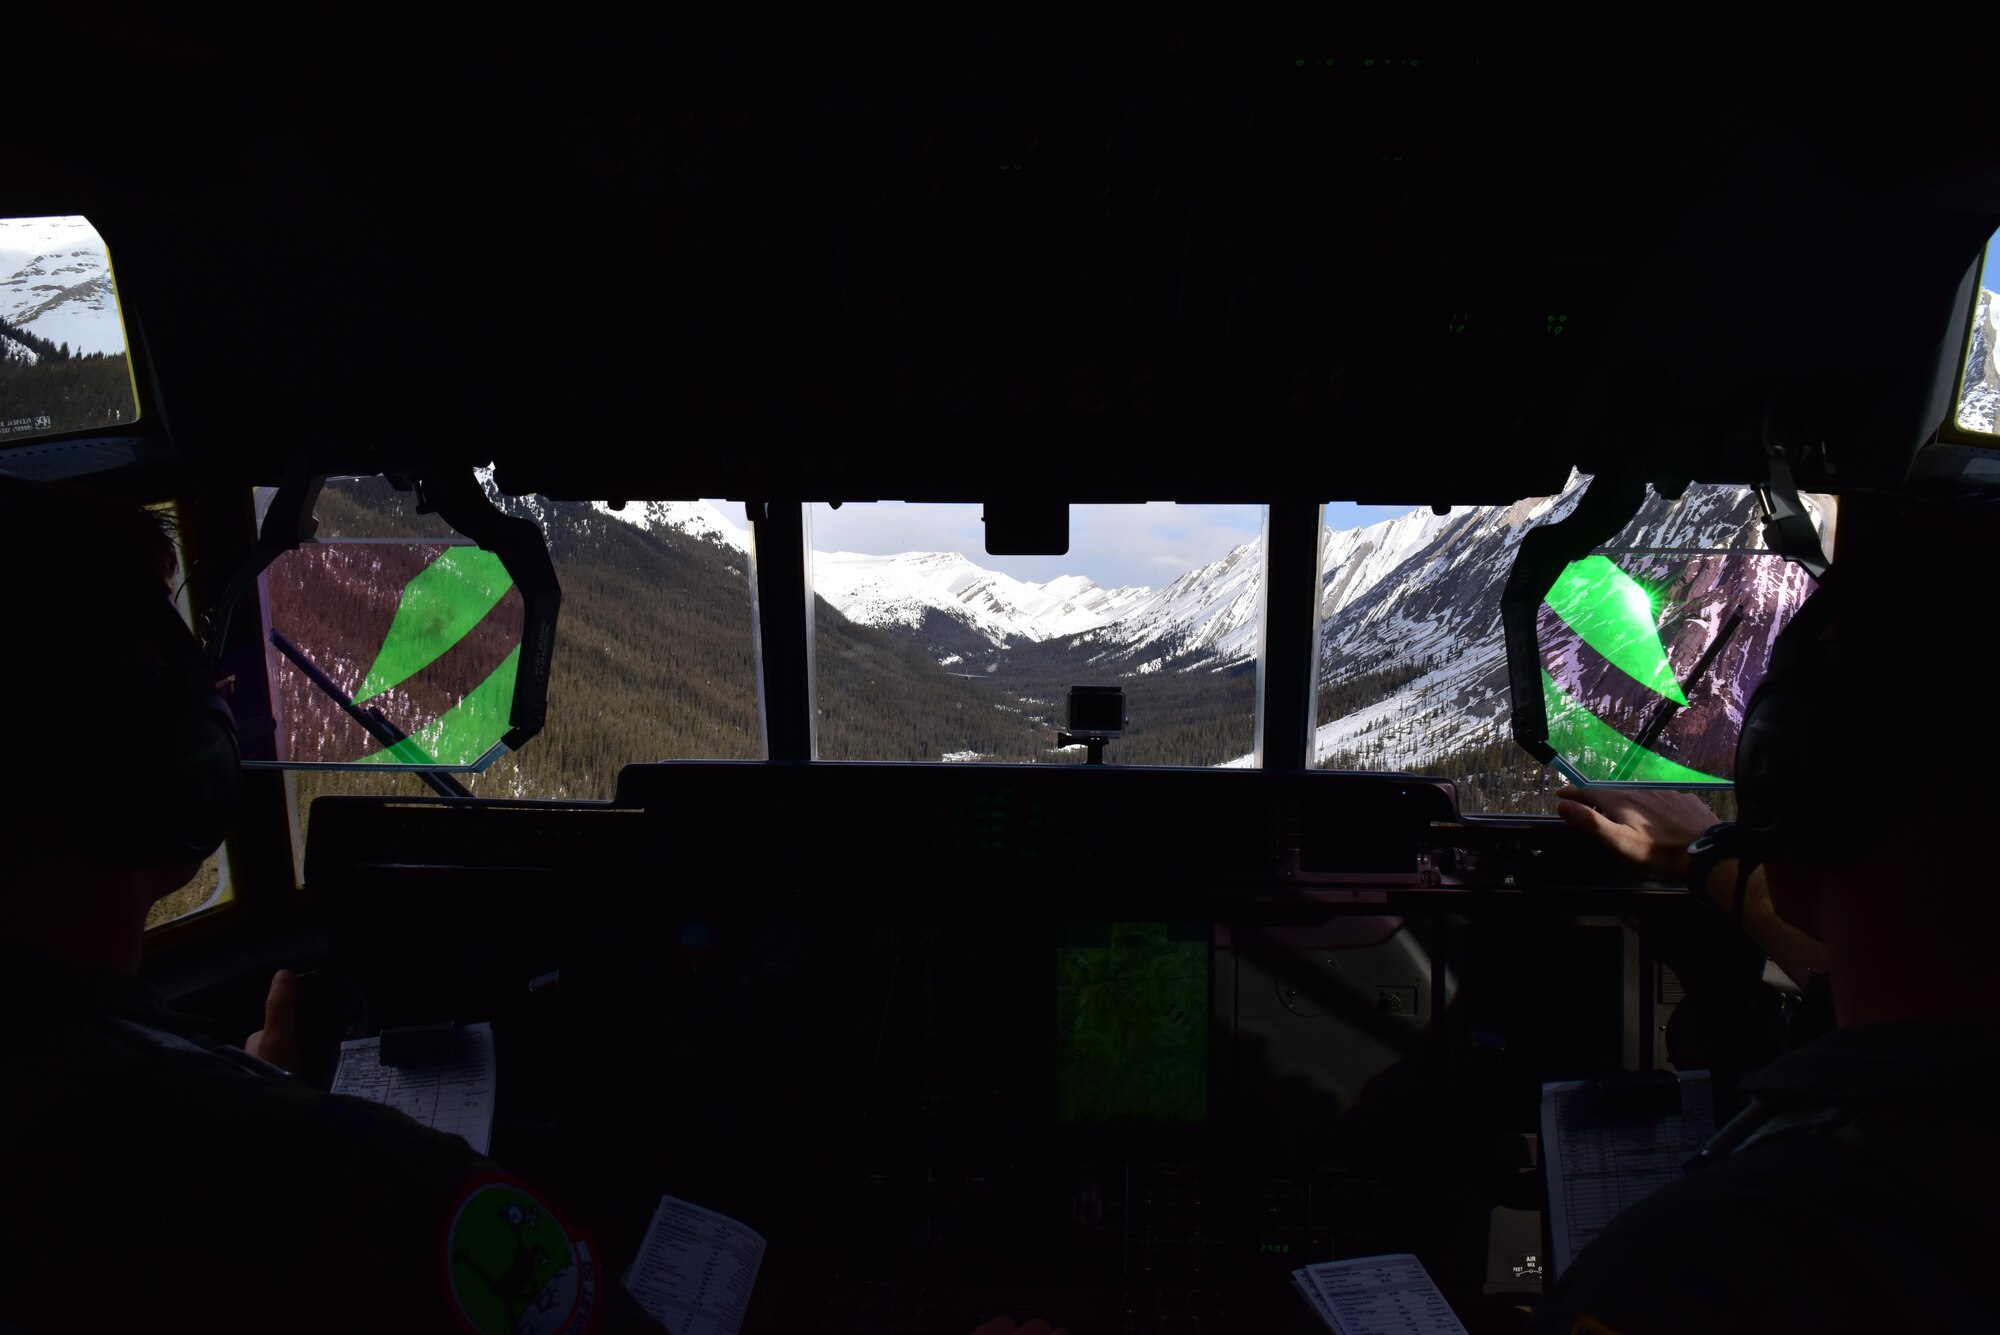 U.S. Air Force Capt. David Tart , left, and 1st Lt. Alex Randall, 41st Airlift Squadron pilots, fly in formation with a Canadian C-130J in the Canadian Rockies executing low altitude high terrain evasion maneuvers during the first Fanatic Pegasus exercise mission with Royal Canadian air forces in Alberta, Canada, April 20, 2017. This is the first time American forces have participated in this exercise which establishes air and ground forces in unfamiliar terrain to work on communication and rapid deployment of those resources.
(U.S. Air Force photo by Staff Sgt. Jeremy McGuffin)